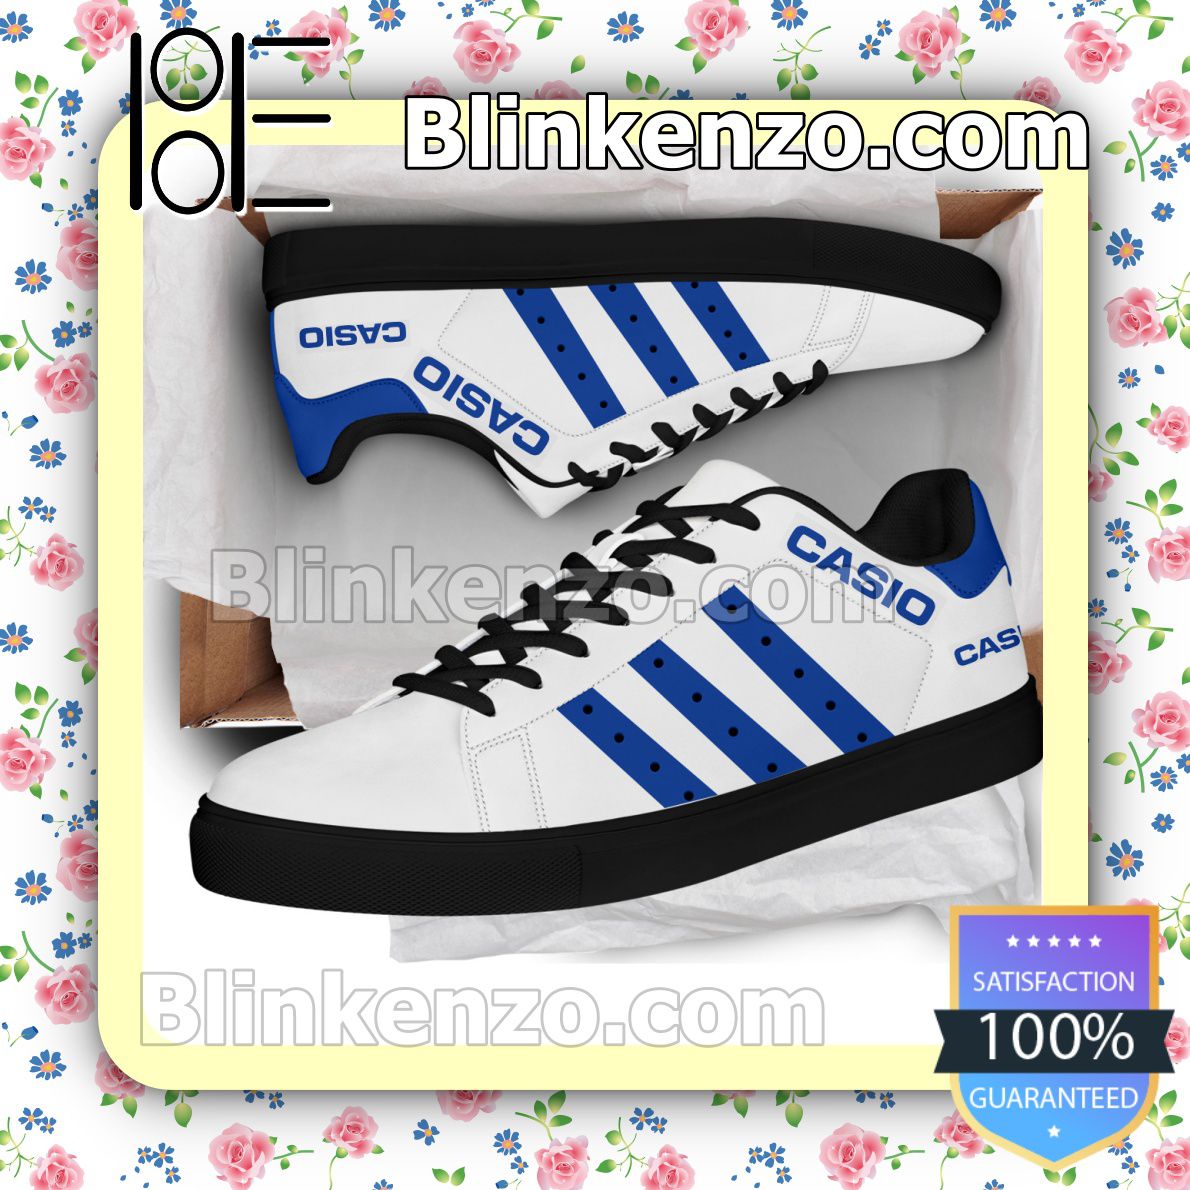 Casio Watch Company Brand Adidas Low Top Shoes